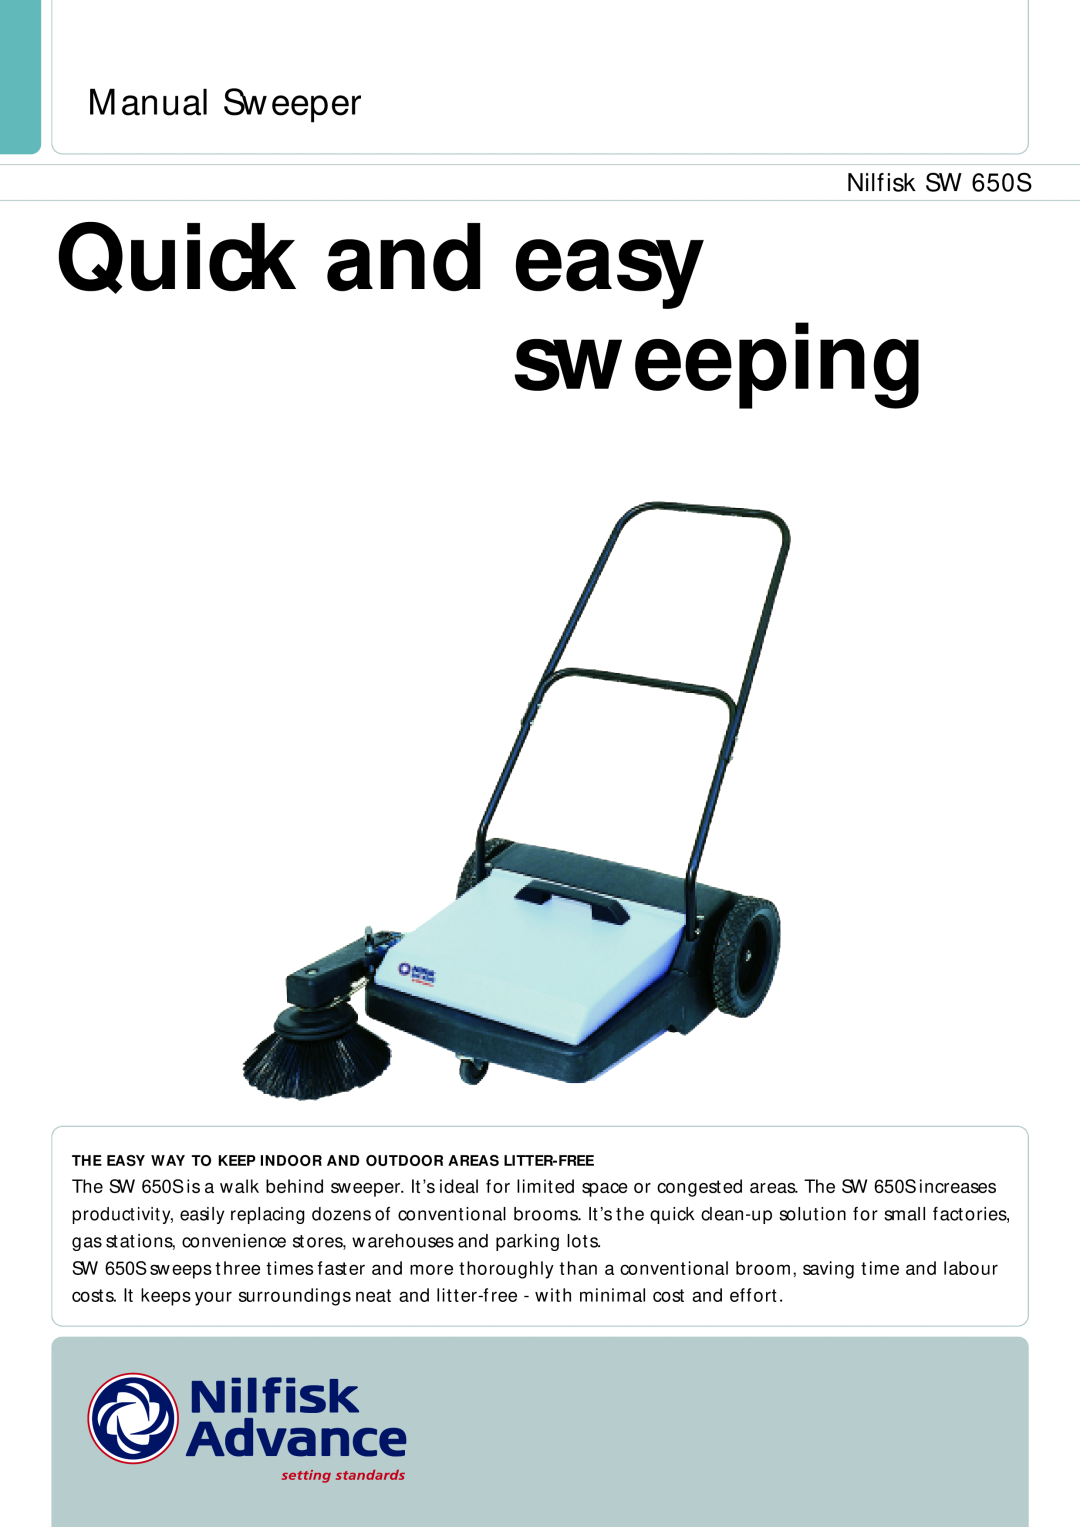 Nilfisk-ALTO manual Quick and easy sweeping, Manual Sweeper, Nilfisk SW 650S 